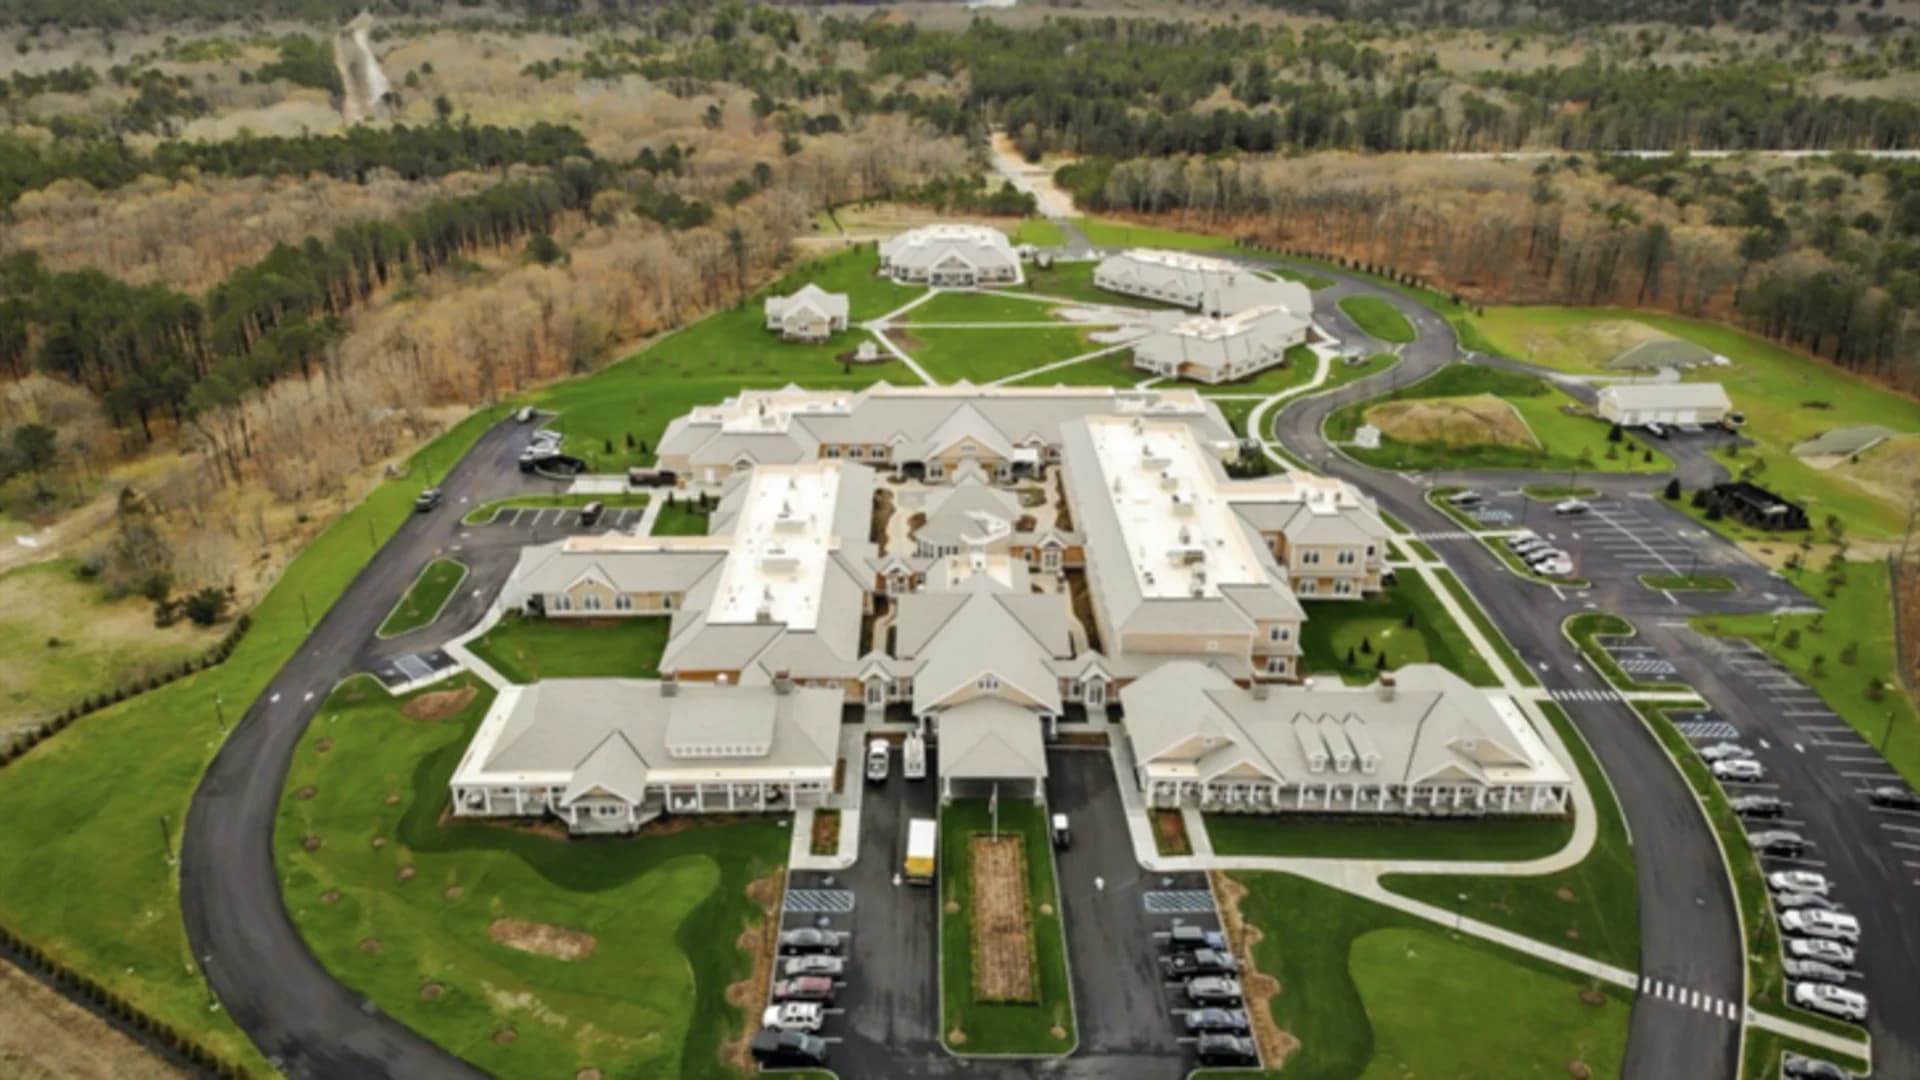 Addiction treatment and research center opens in Calverton